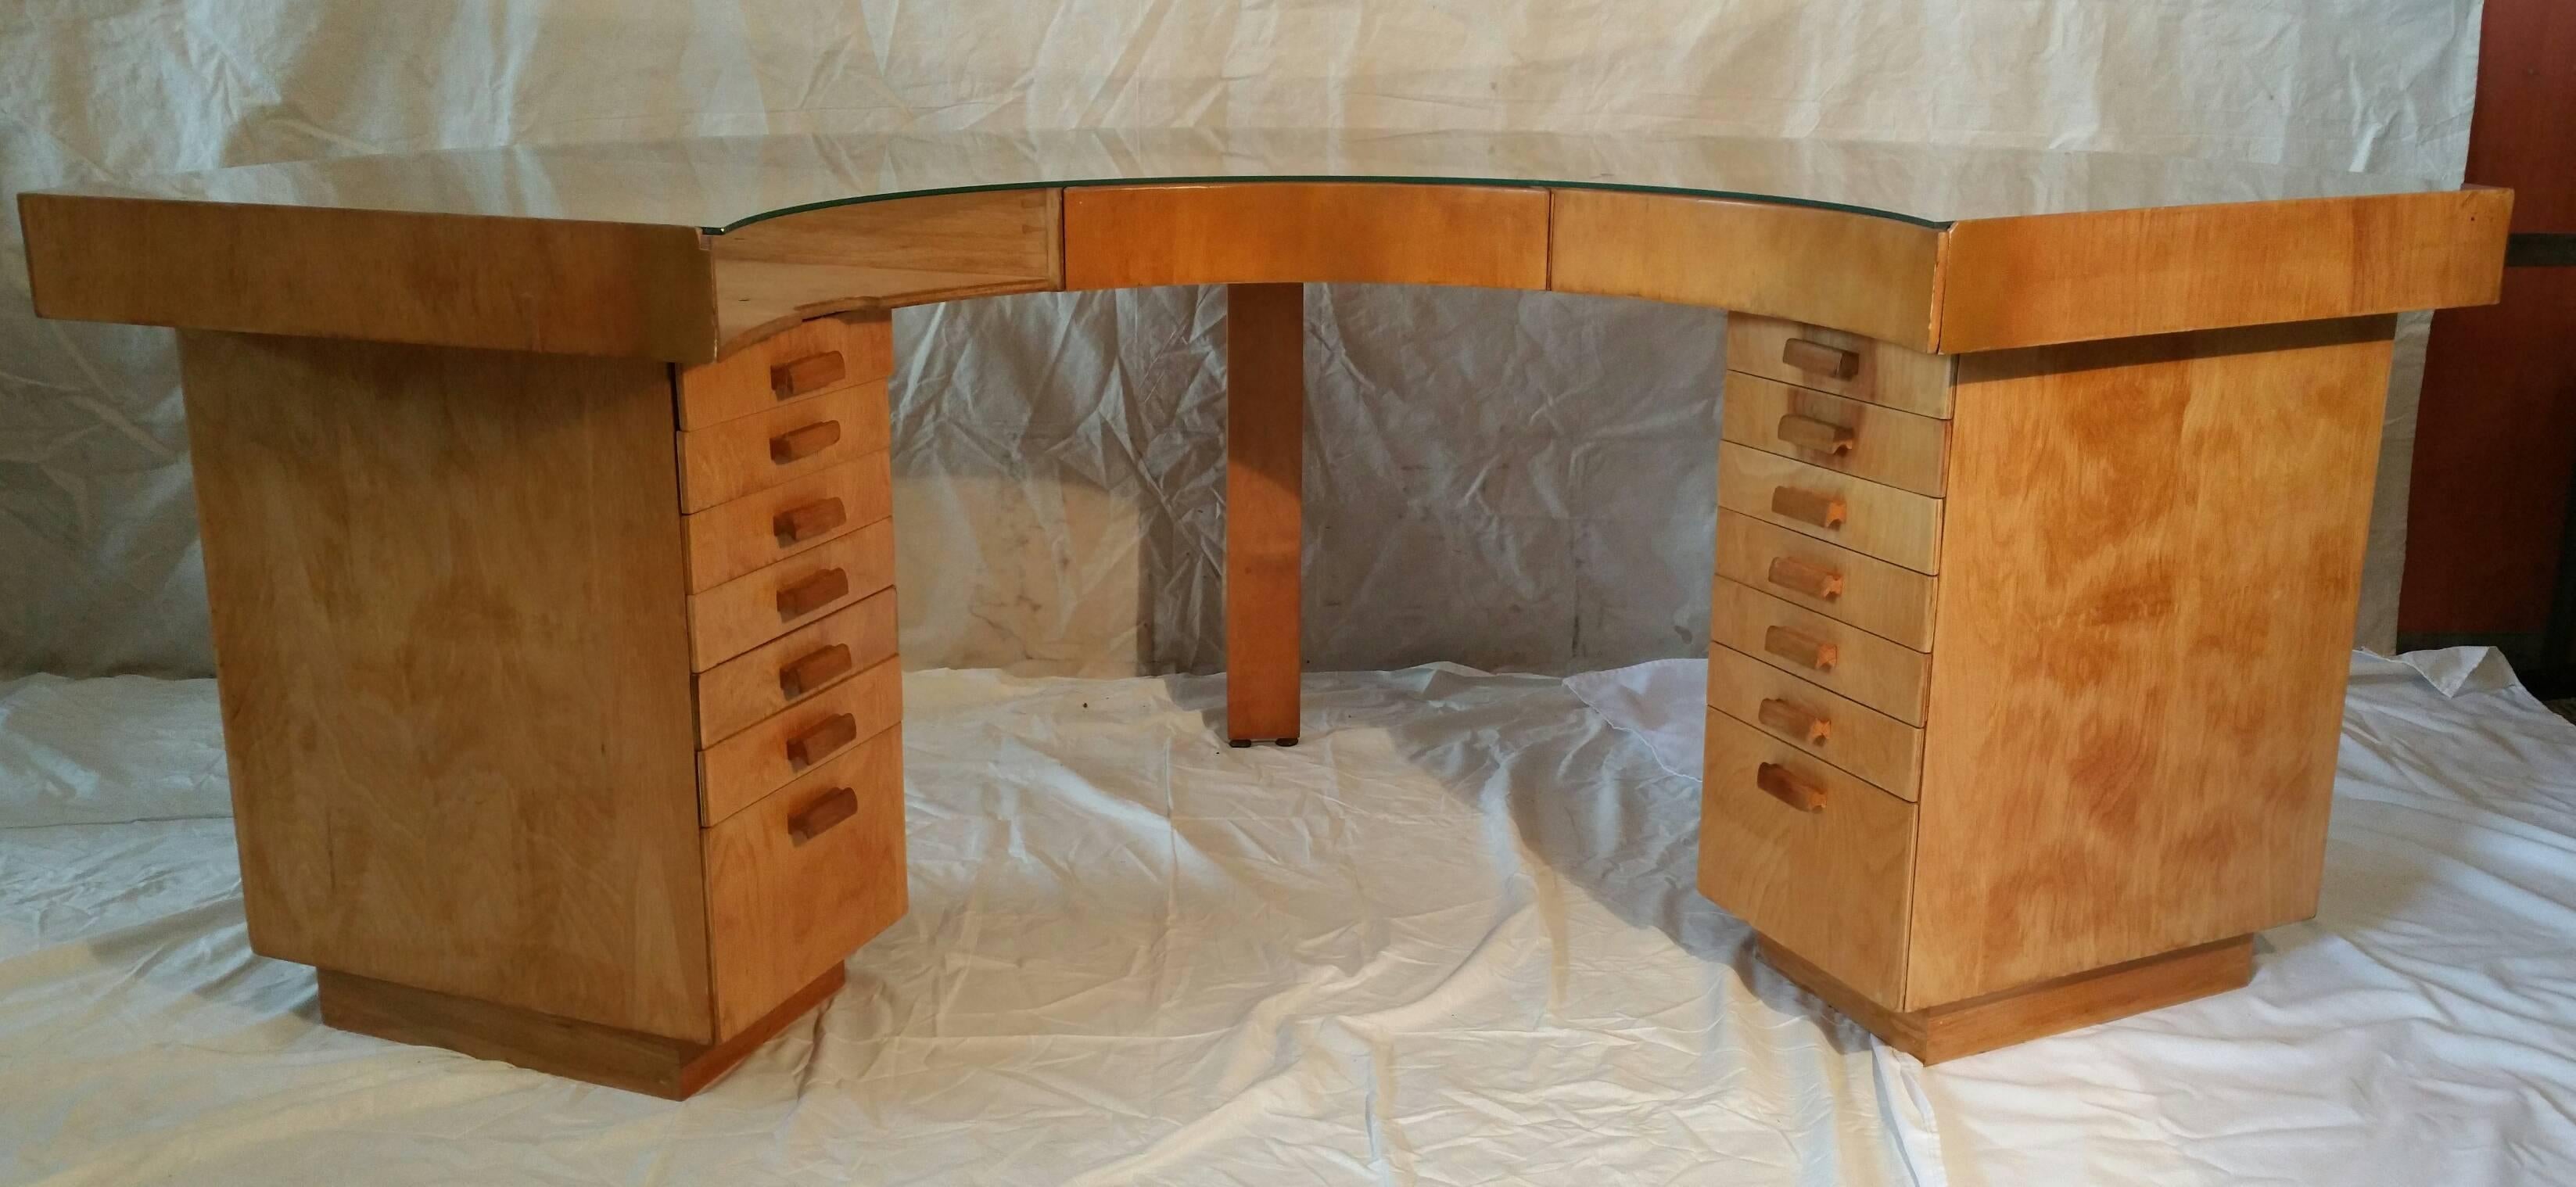 Art Deco Birch Plywood Jewelers Desk, Manner of Alvar Aalto In Good Condition For Sale In Buffalo, NY